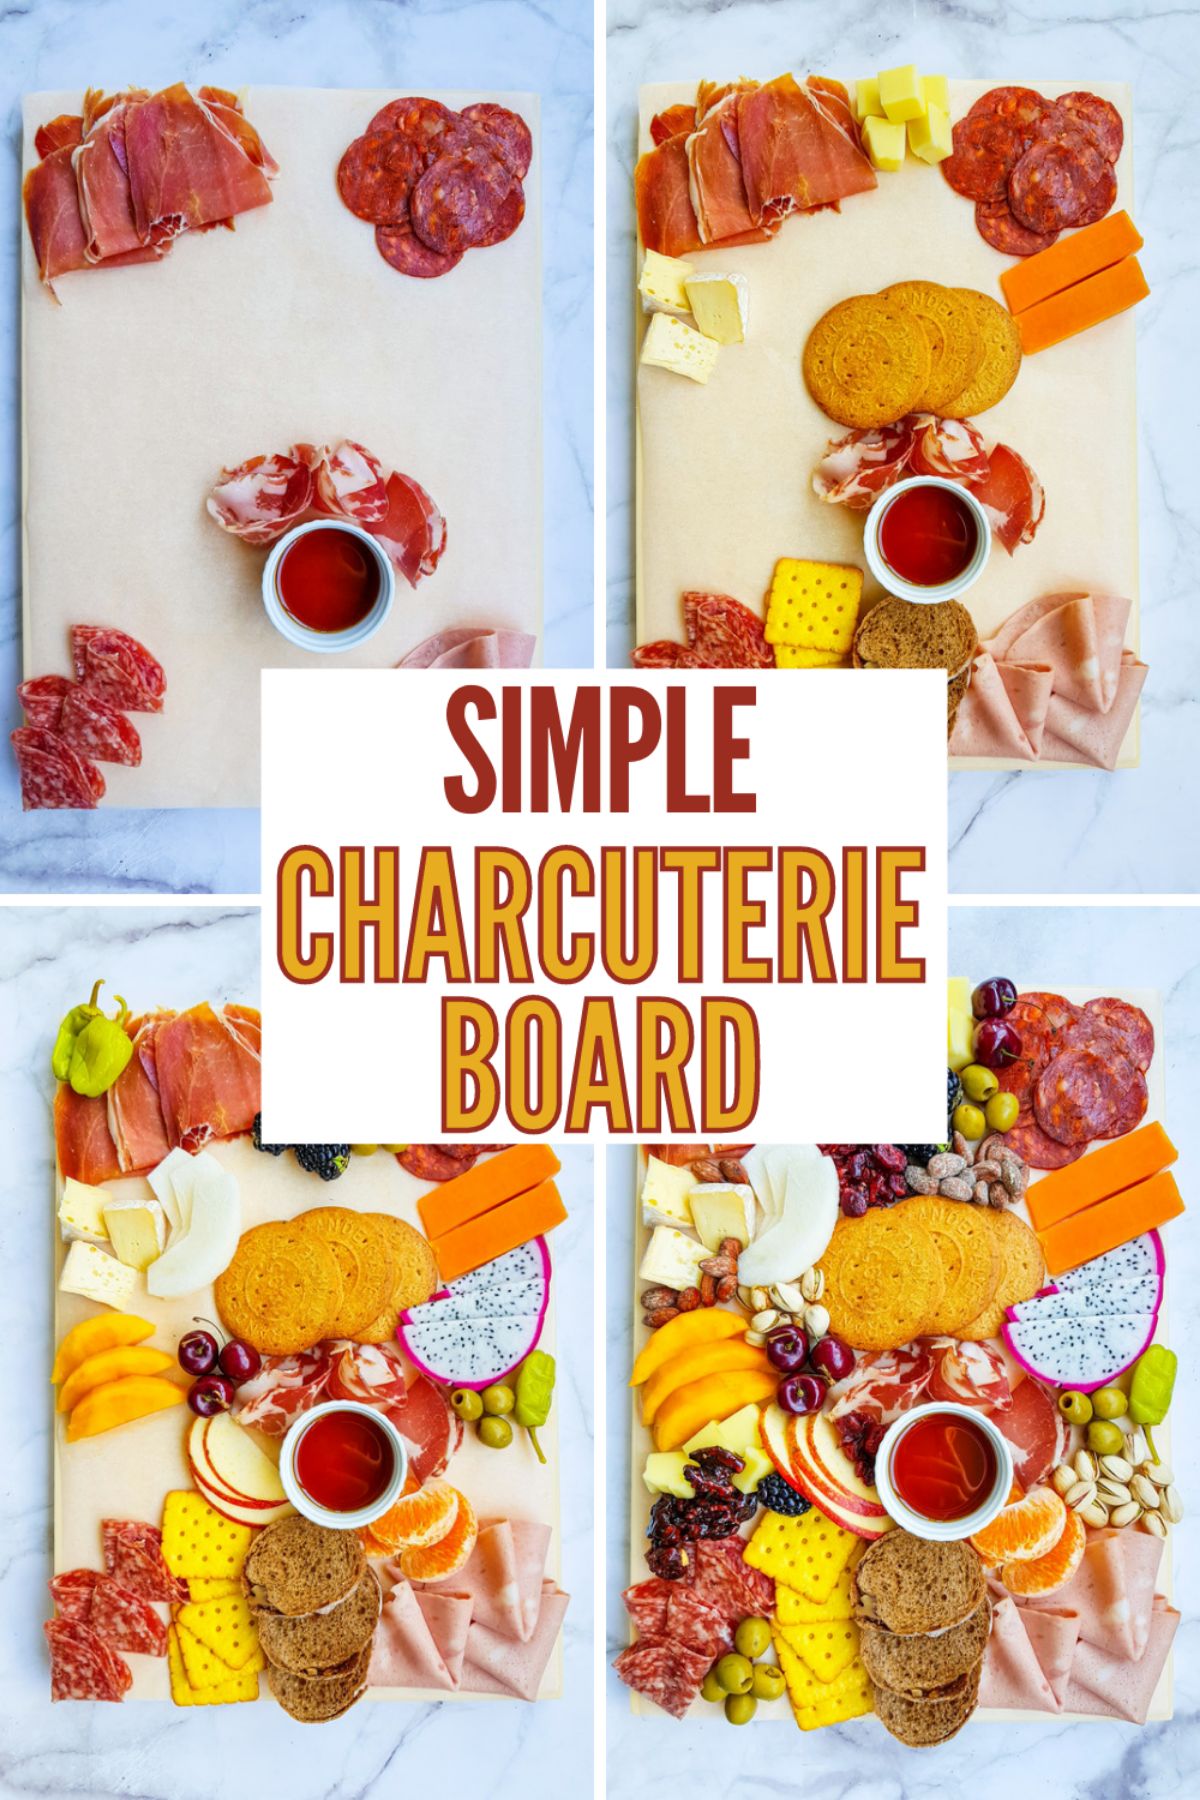 A collage of 4 images showing the process of making a Simple Charcuterie Board.